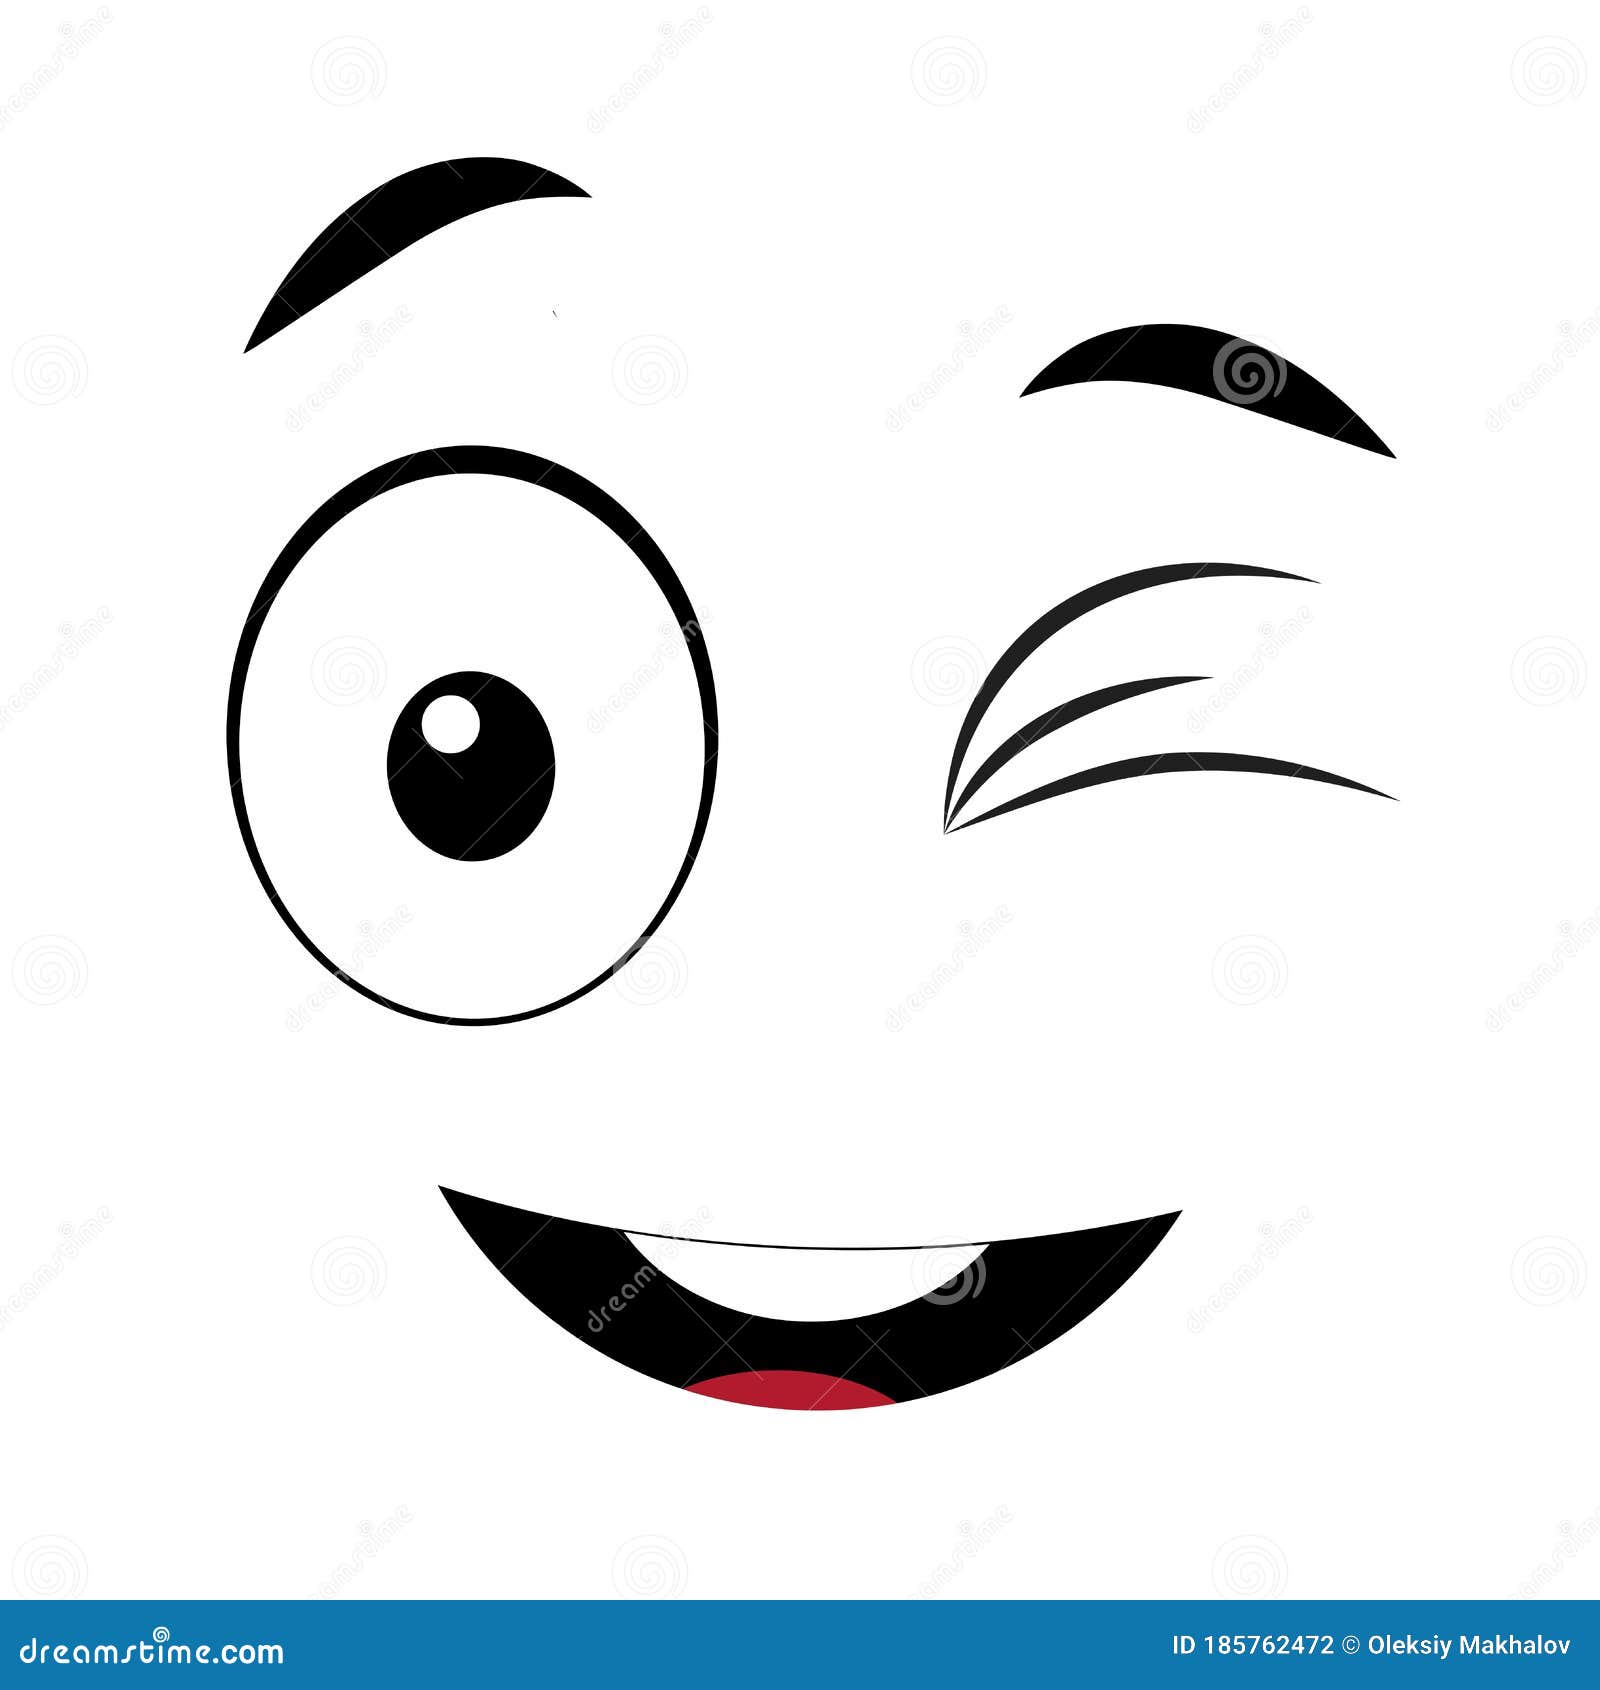 Cartoon Faces. Expressive Eyes and Mouth Character Expressions. Caricature  Comic Emotions or Emoticon Doodle Stock Vector - Illustration of evil,  emoticon: 185762472